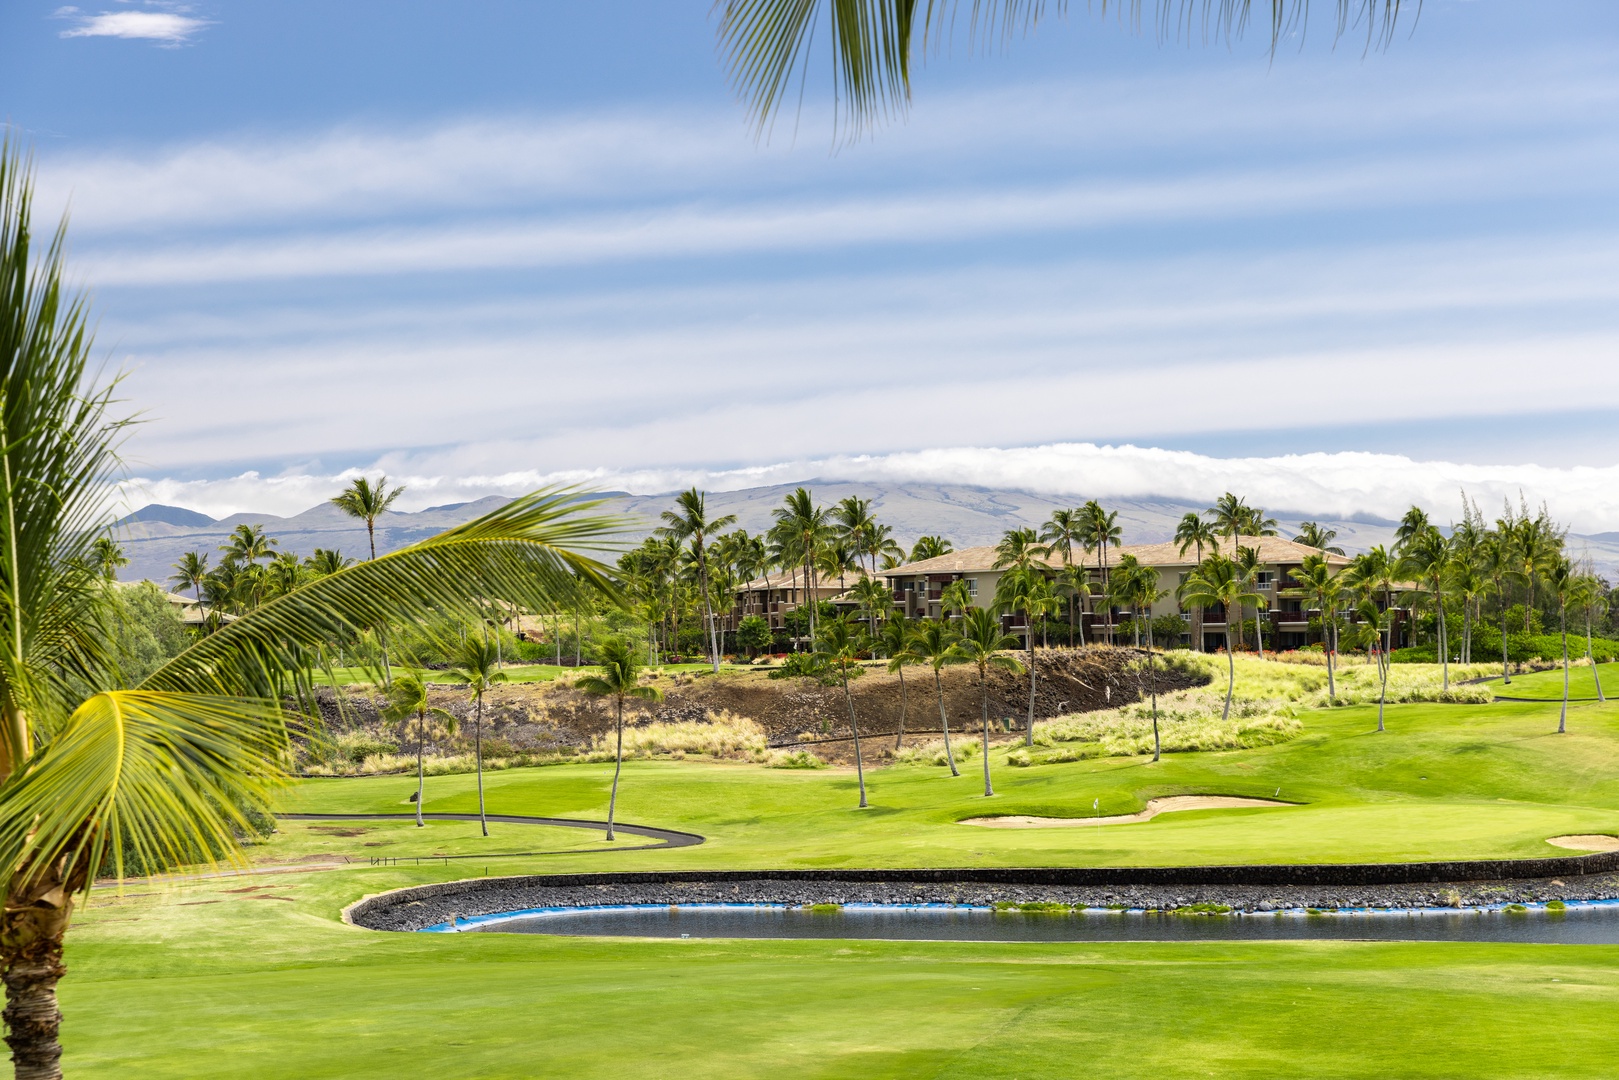 Waikoloa Vacation Rentals, Fairway Villas at Waikoloa Beach Resort E34 - Enjoy watching the golfers play hoping to get a hole-in-one